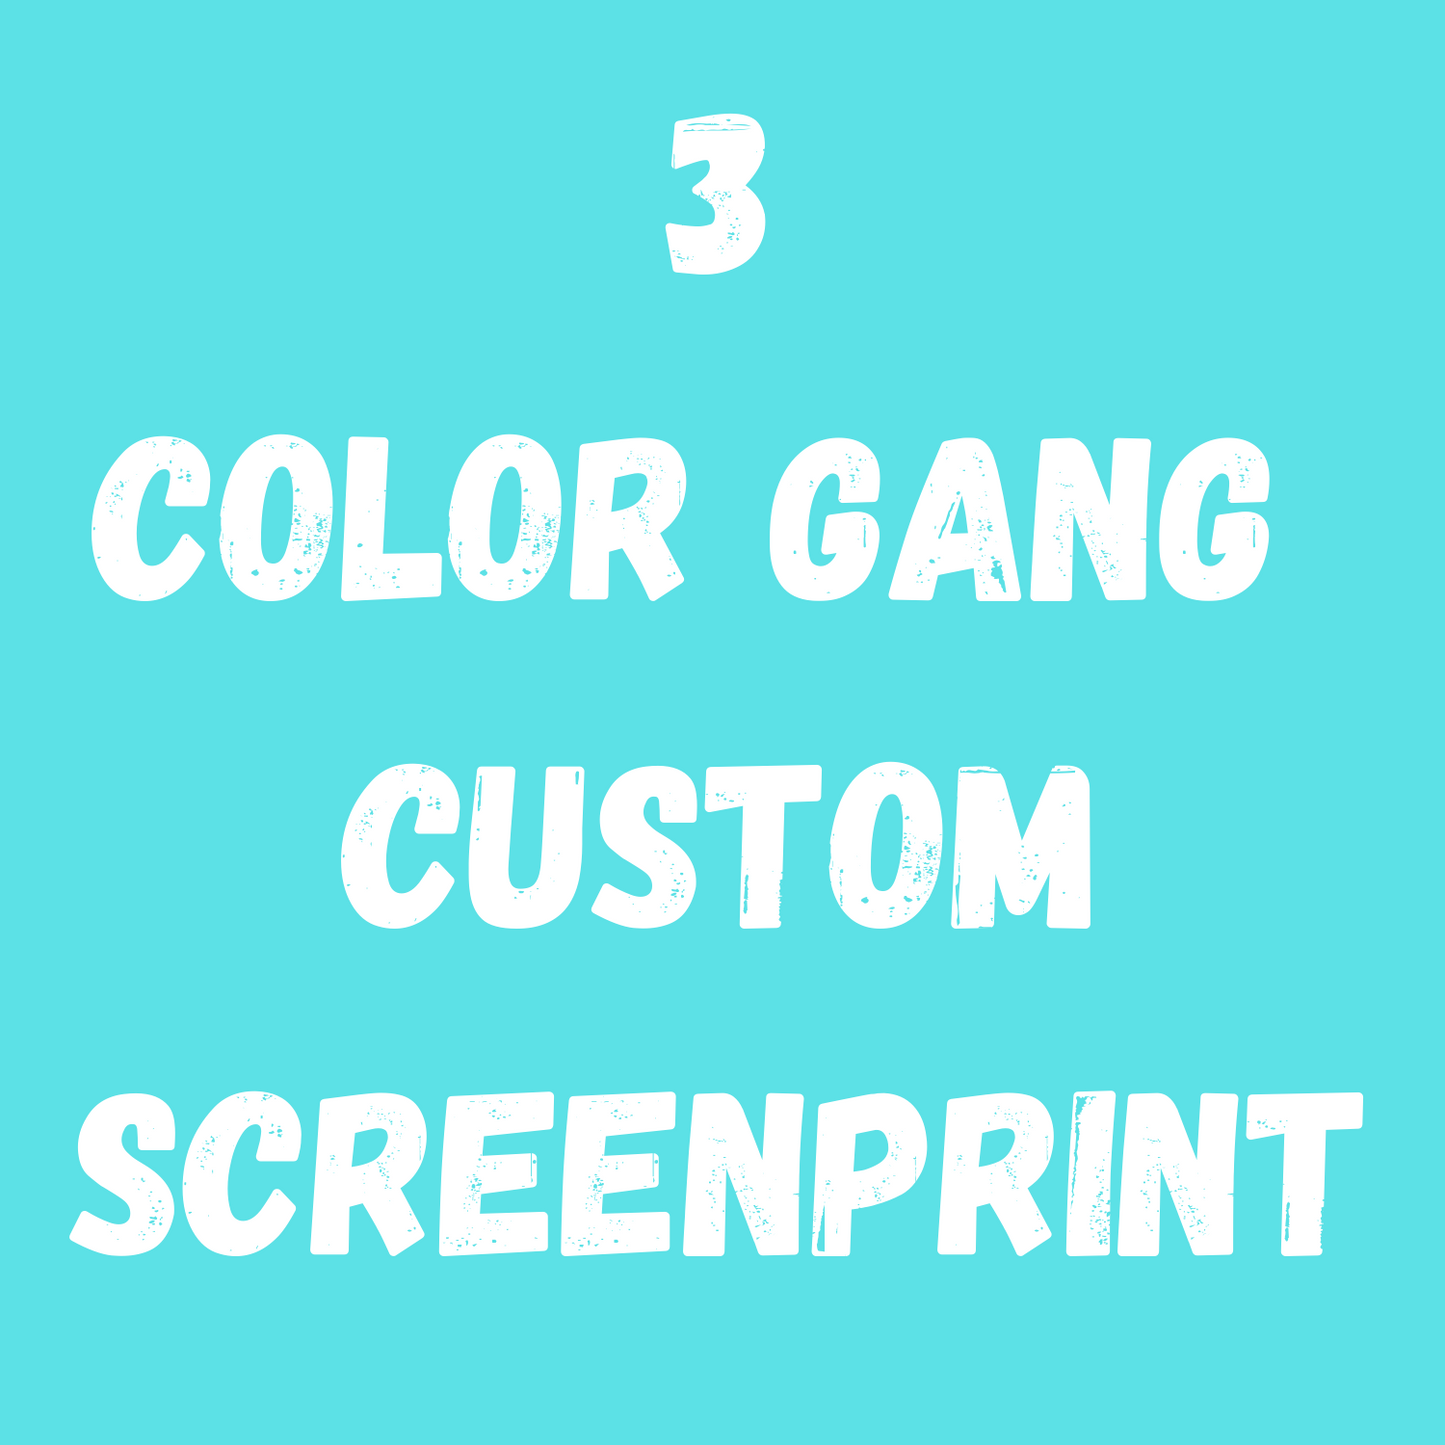 3 Color Gang Custom Screenprint transfers *7-9 business day TAT from ARTWORK APPROVAL